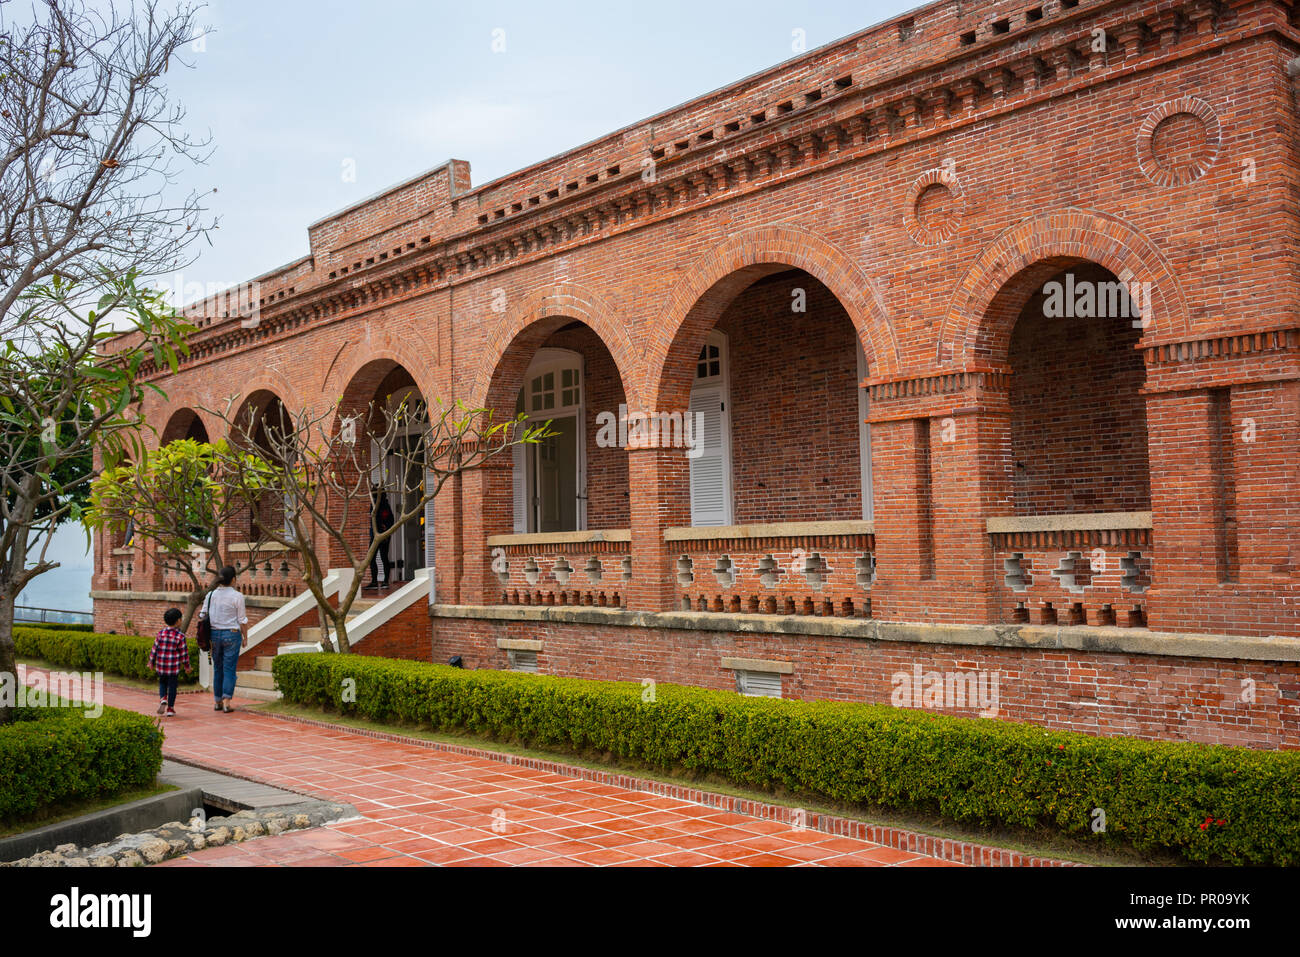 Exterior view of the red-brick former British Consulate Residence at Takou in Kaohsiung Taiwan Stock Photo